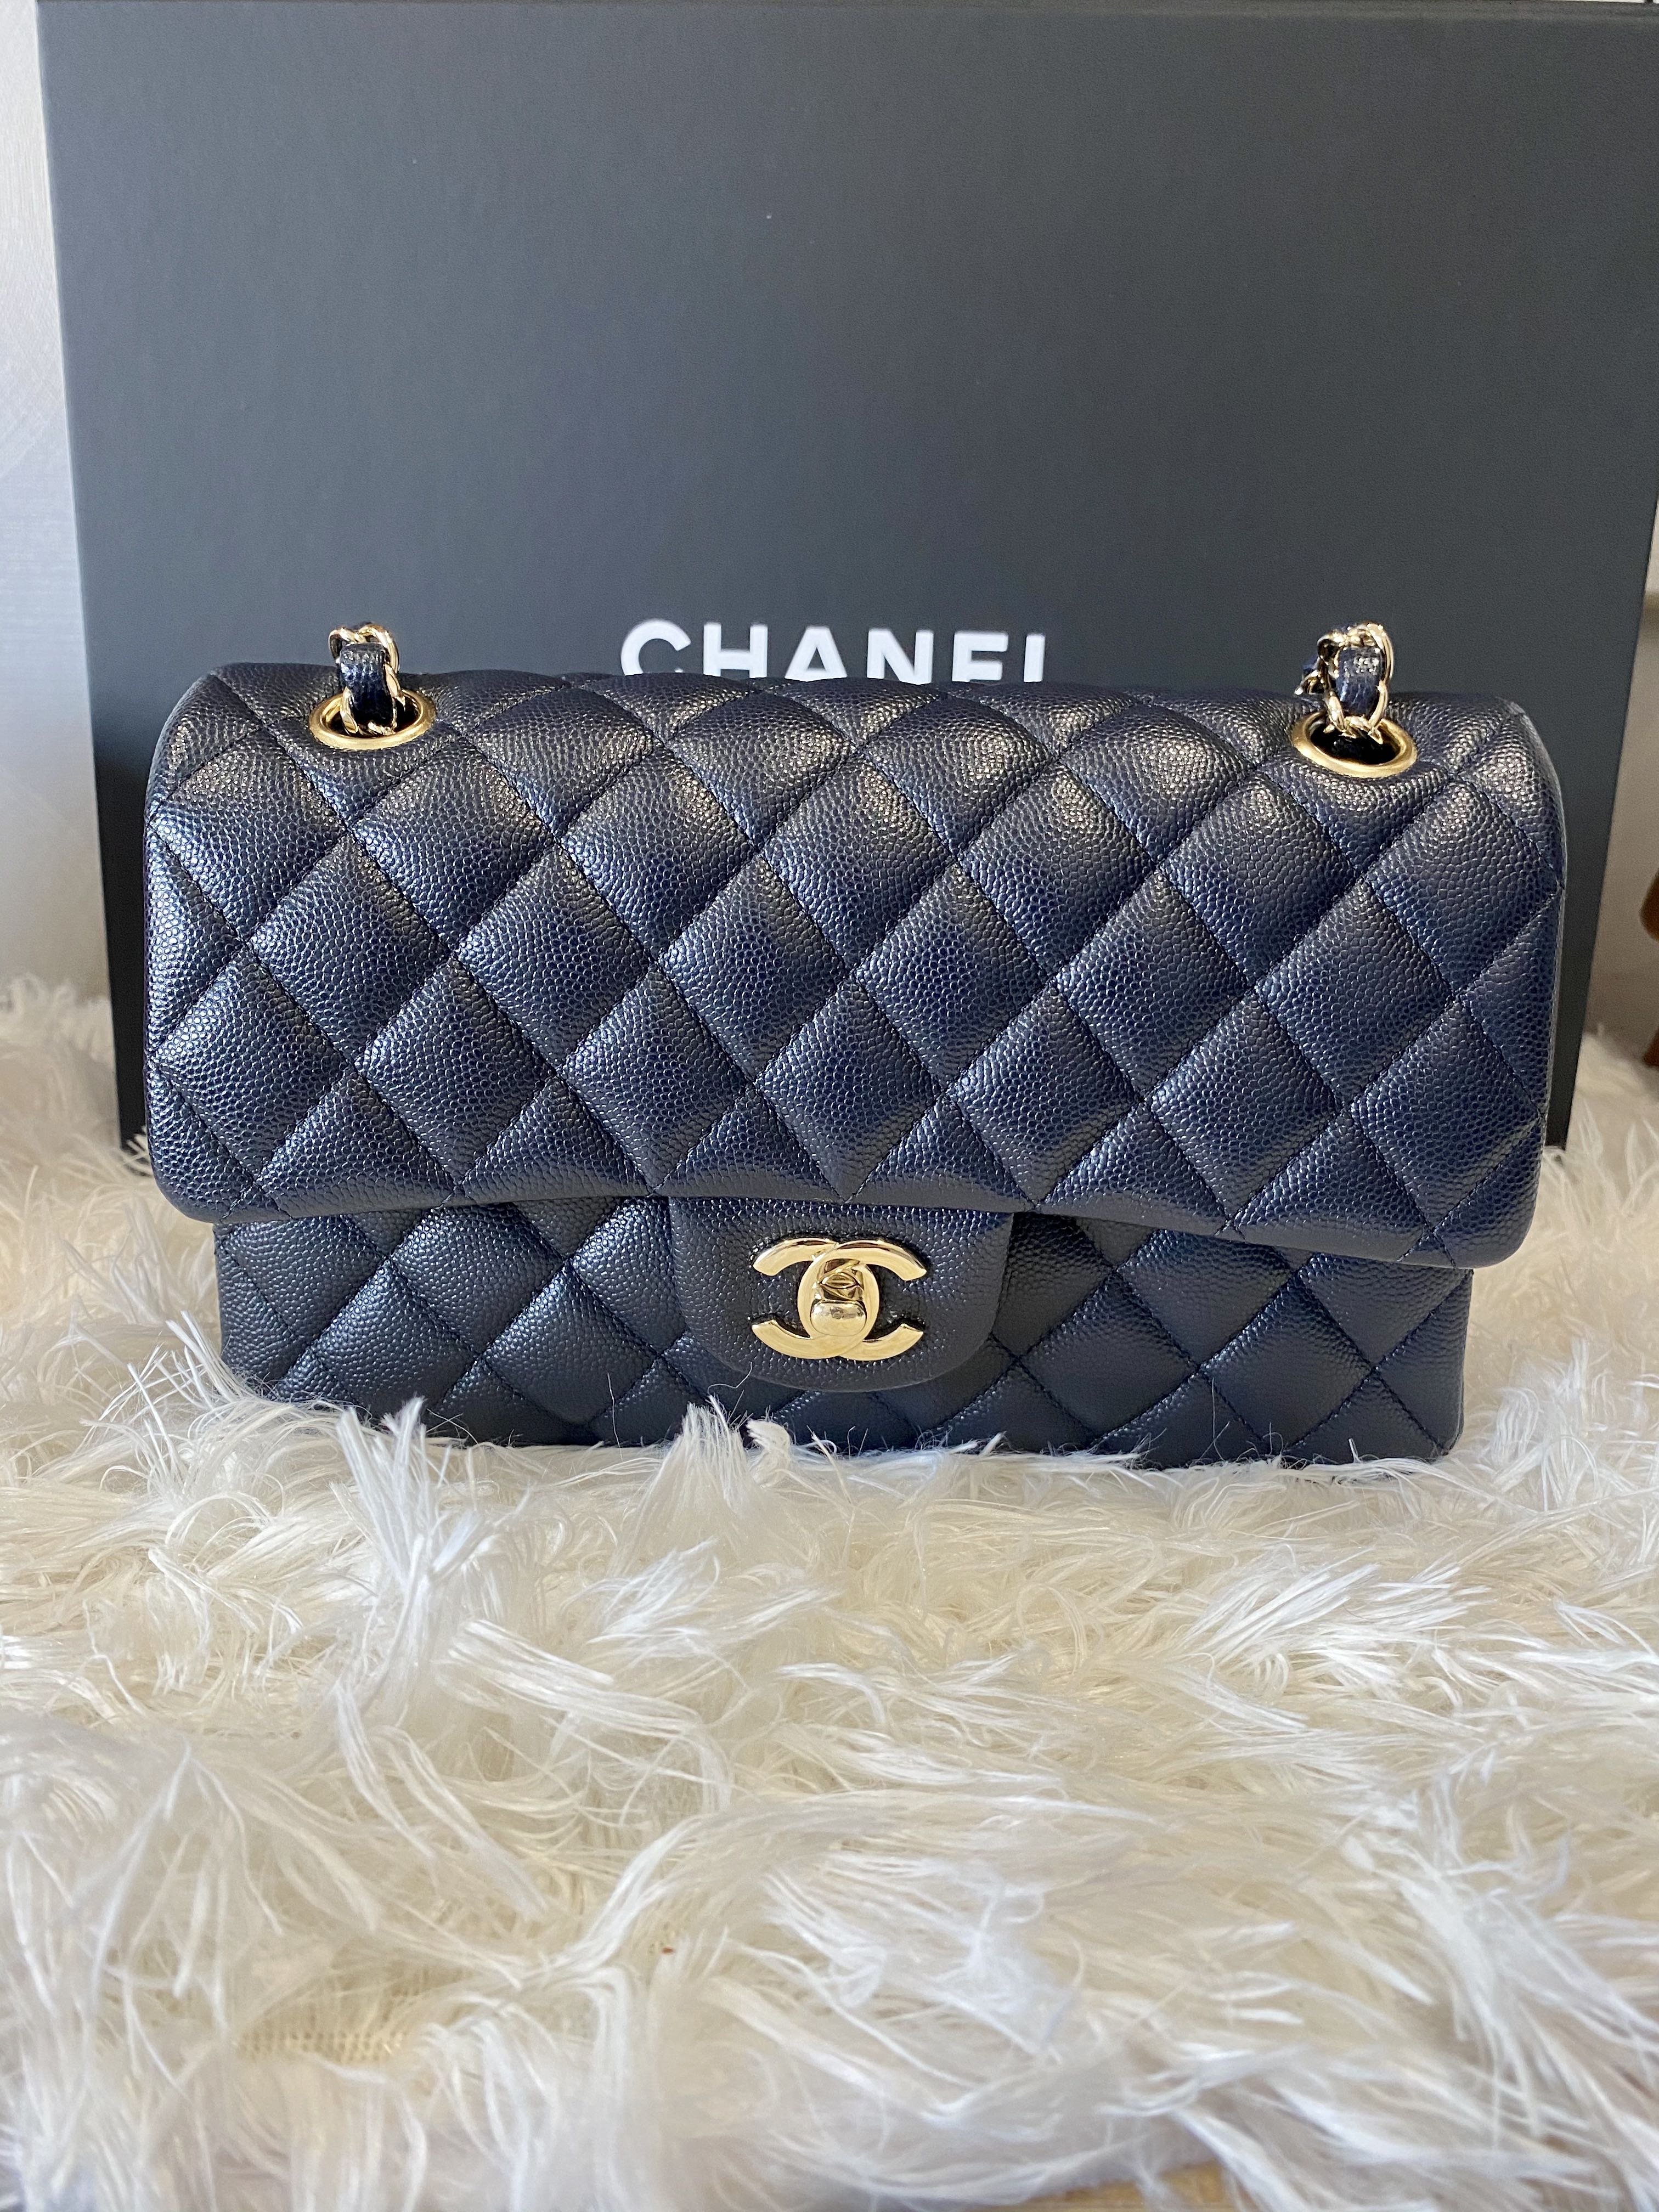 Chanel classic flap small in navy blue